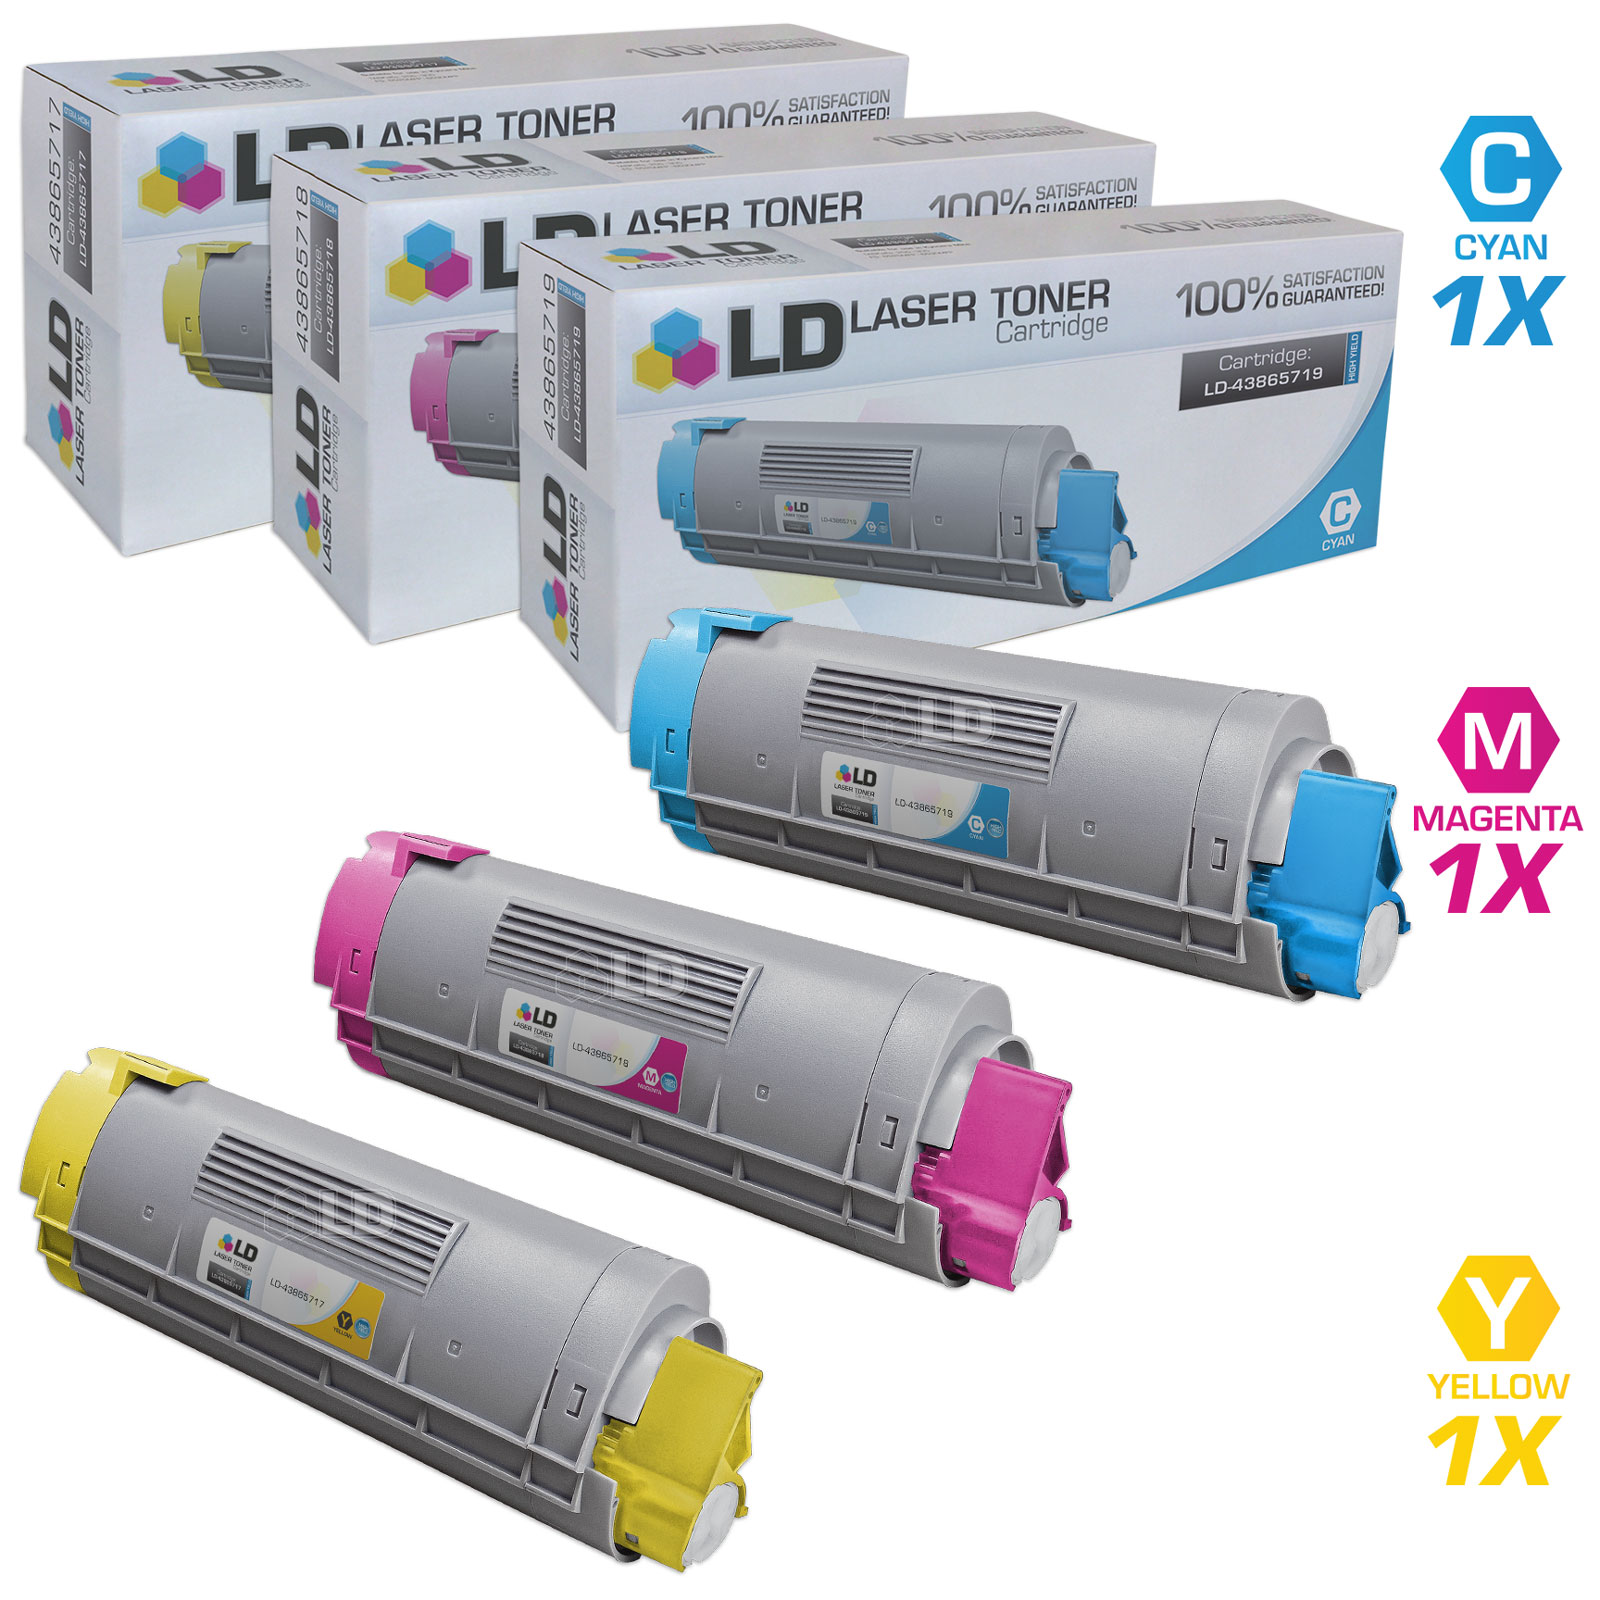 LD Compatible Replacements for Okidata Set of 3 High Yield Laser Toner Cartridges Includes: 1 43865719 HY Cyan, 1 43865718 HY Magenta, and 1 43865717 HY Yellow - image 1 of 1